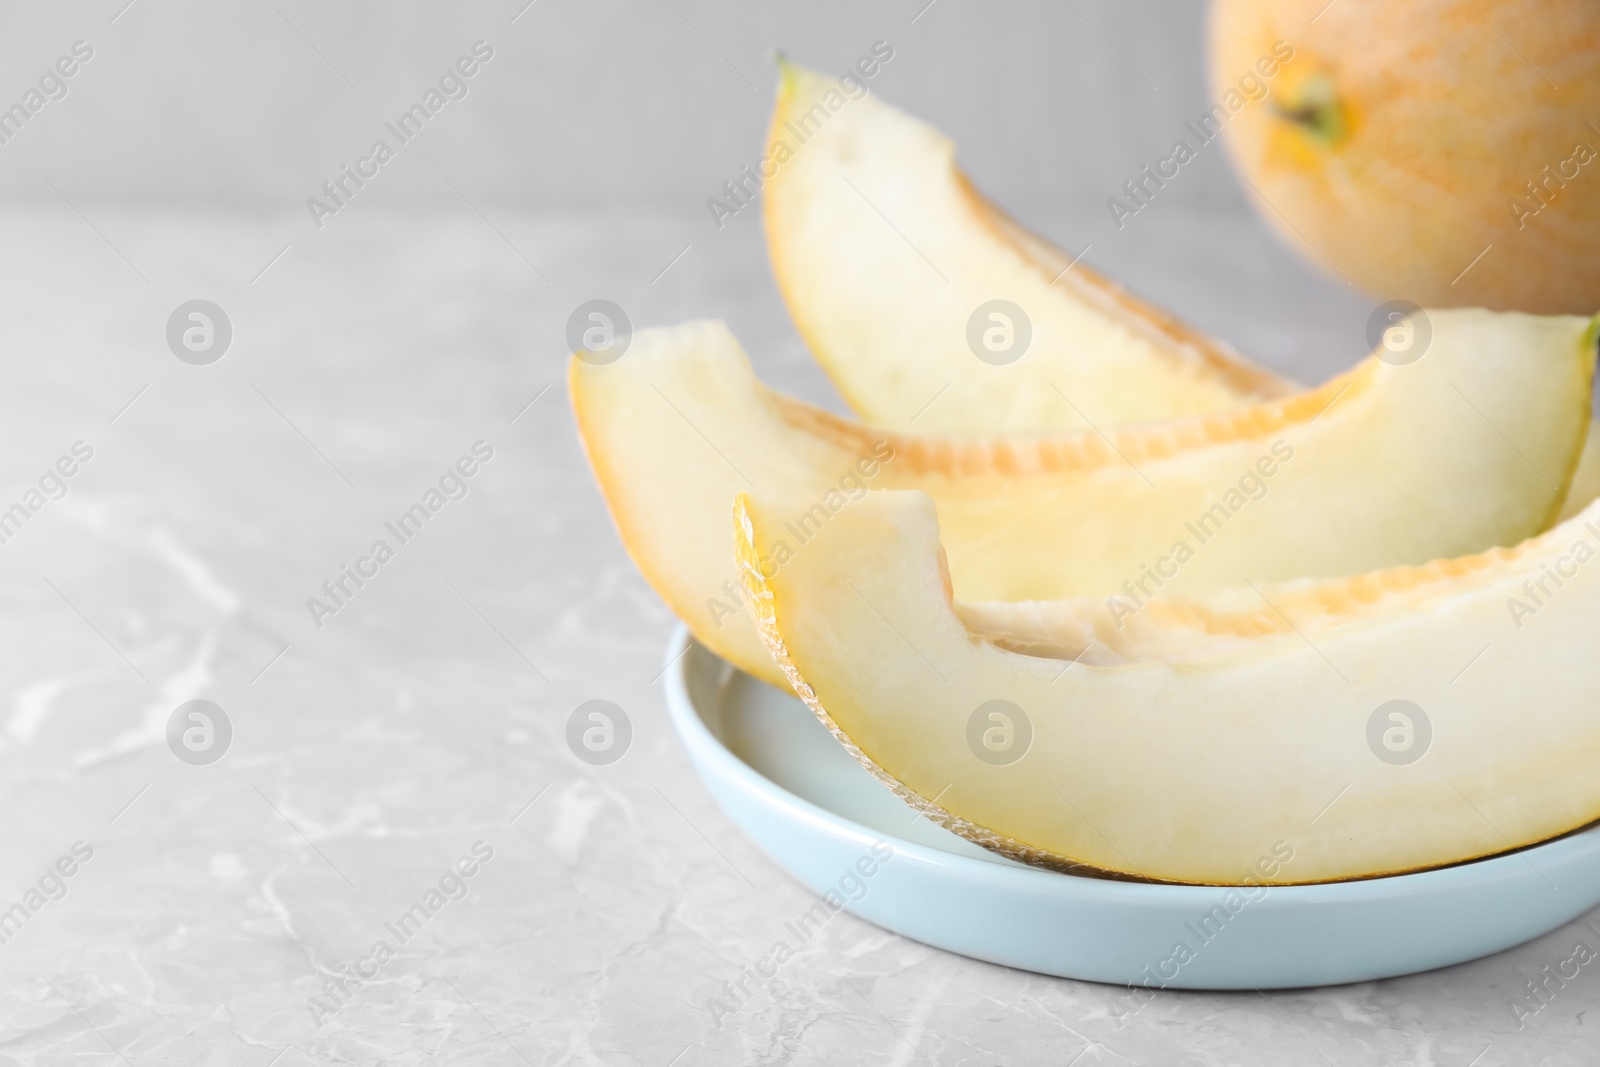 Photo of Pieces of delicious honeydew melon on light grey marble table